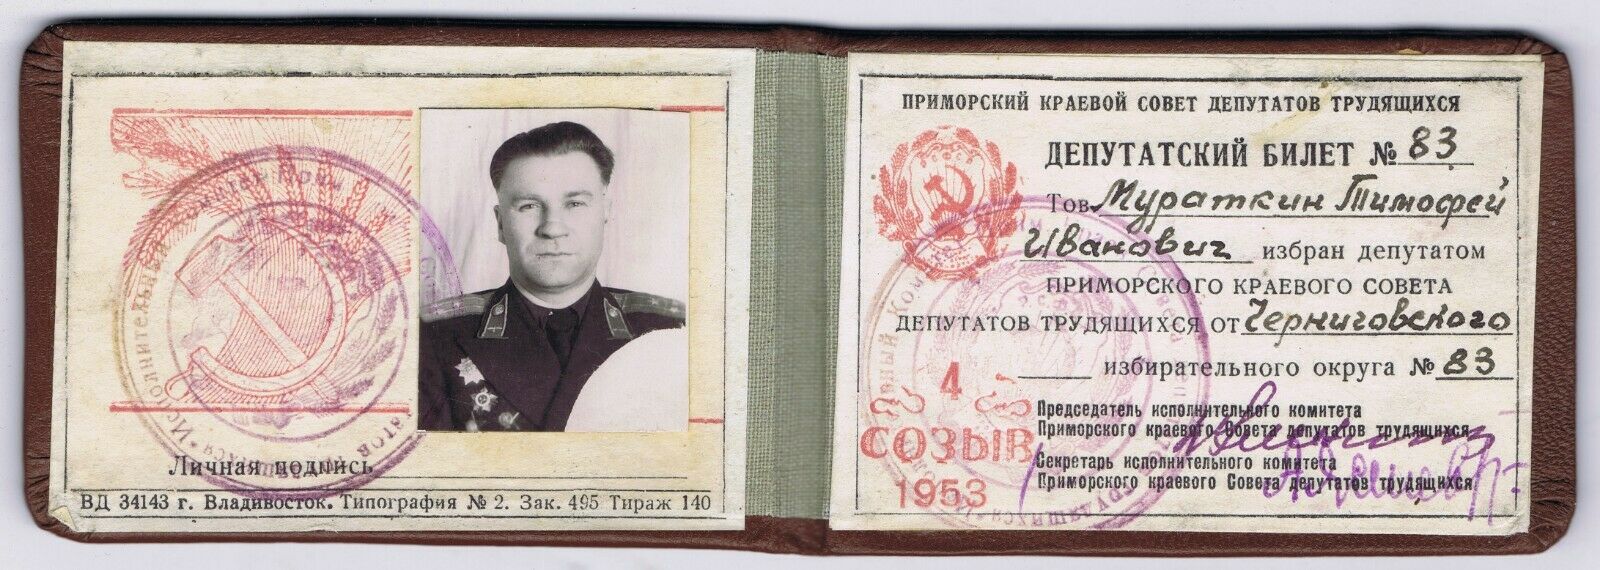 GREAT SOLDIER of the RED (USSR - CCCP) ARMY COMMUNIST PARTY MEMBERSHIP BOOKLET